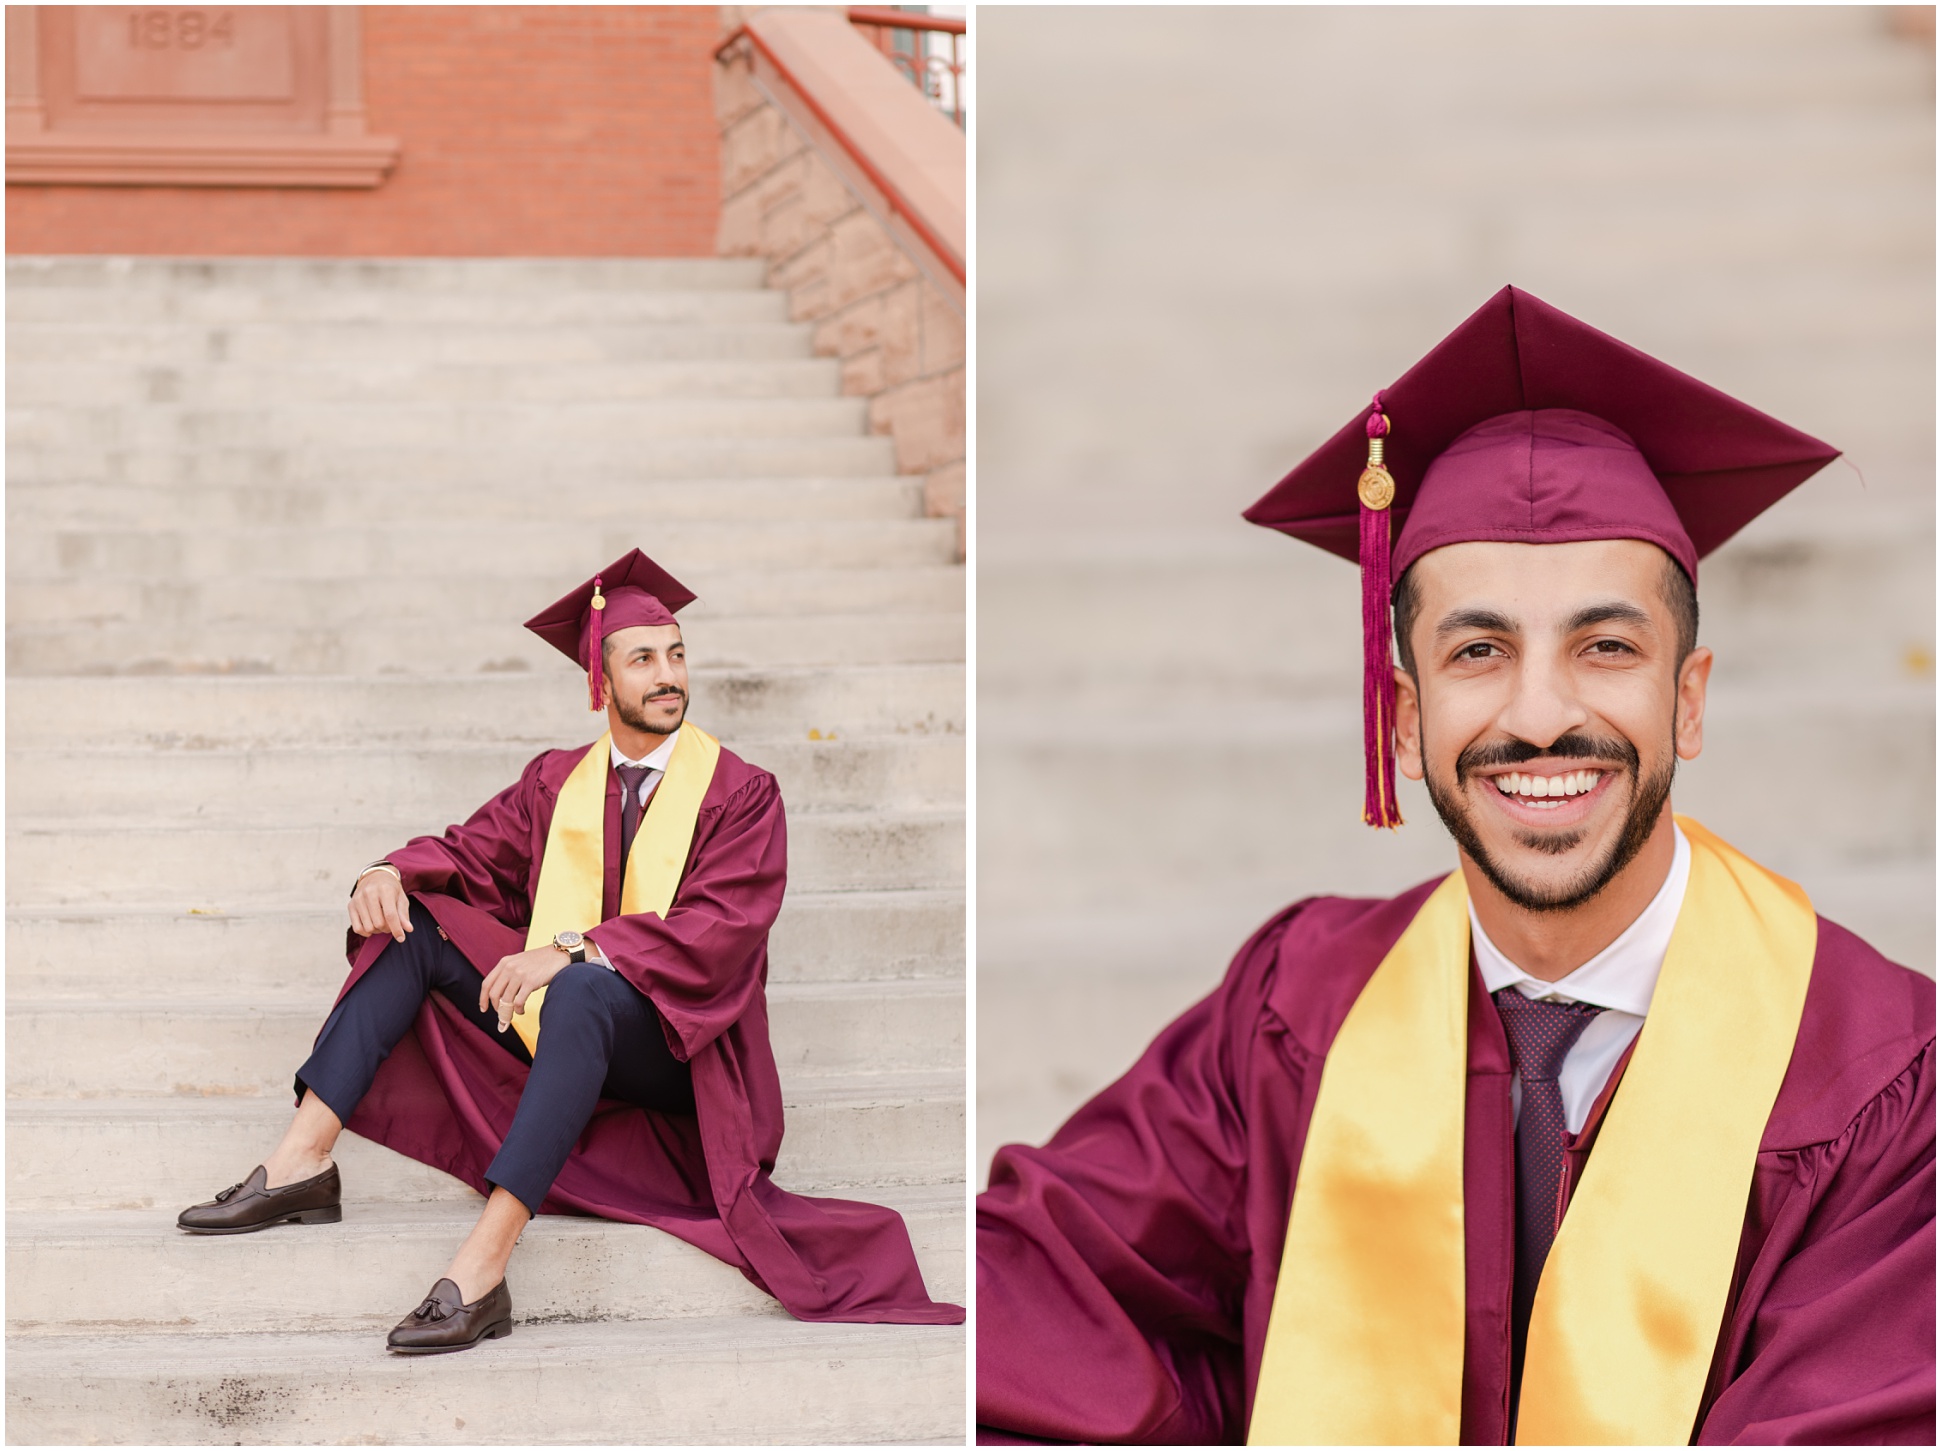 ASU graduate casually sitting on stairs; ASU student sitting on stairs while smiling at the camera in graduation attire